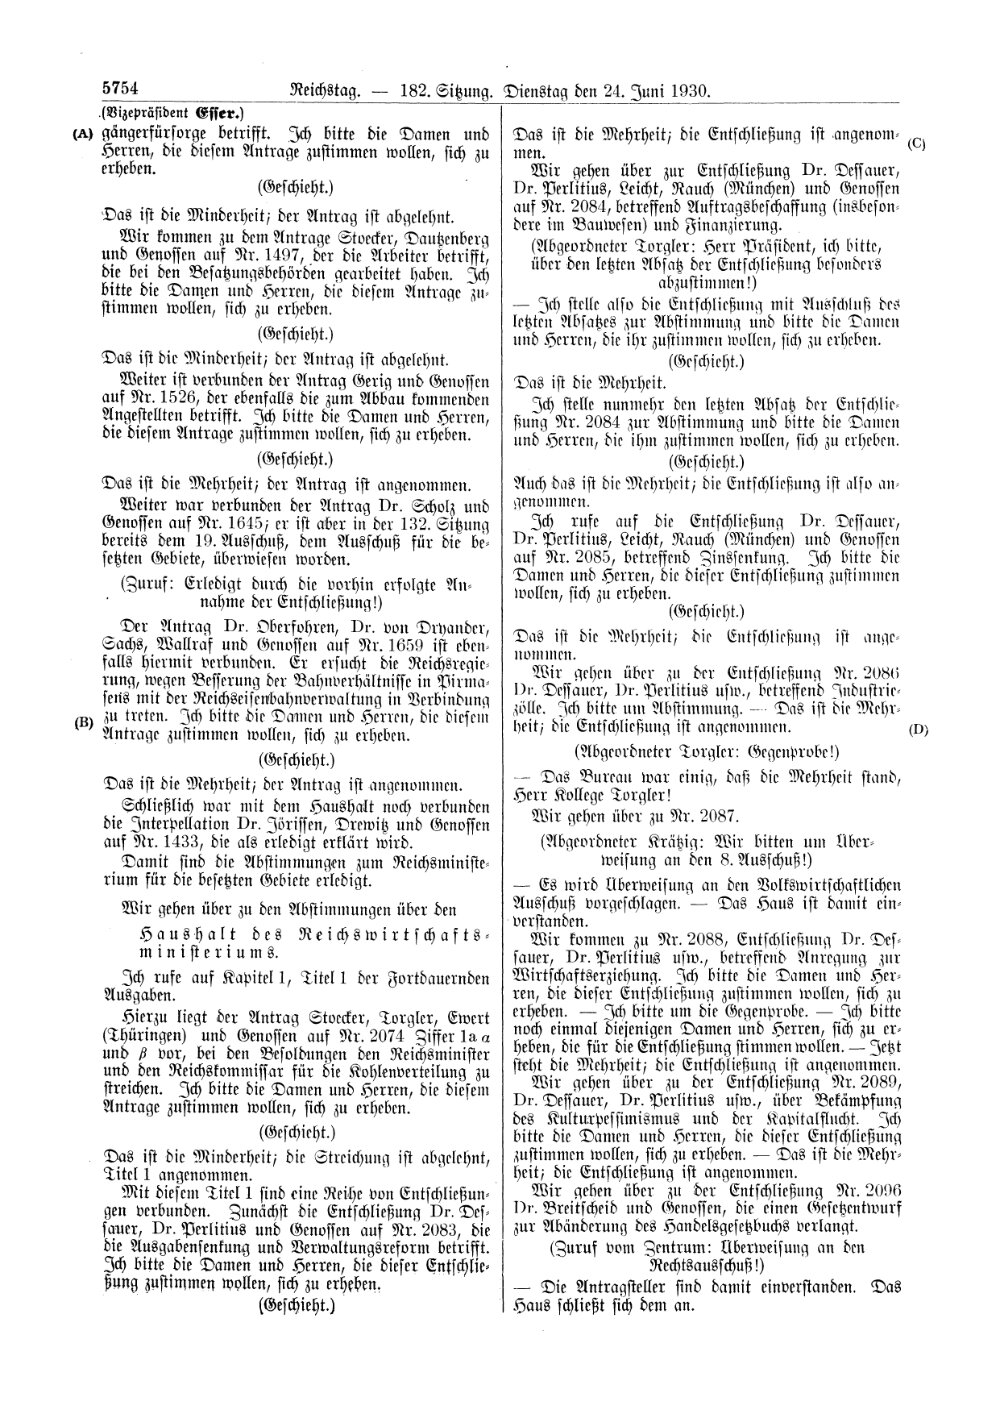 Scan of page 5754